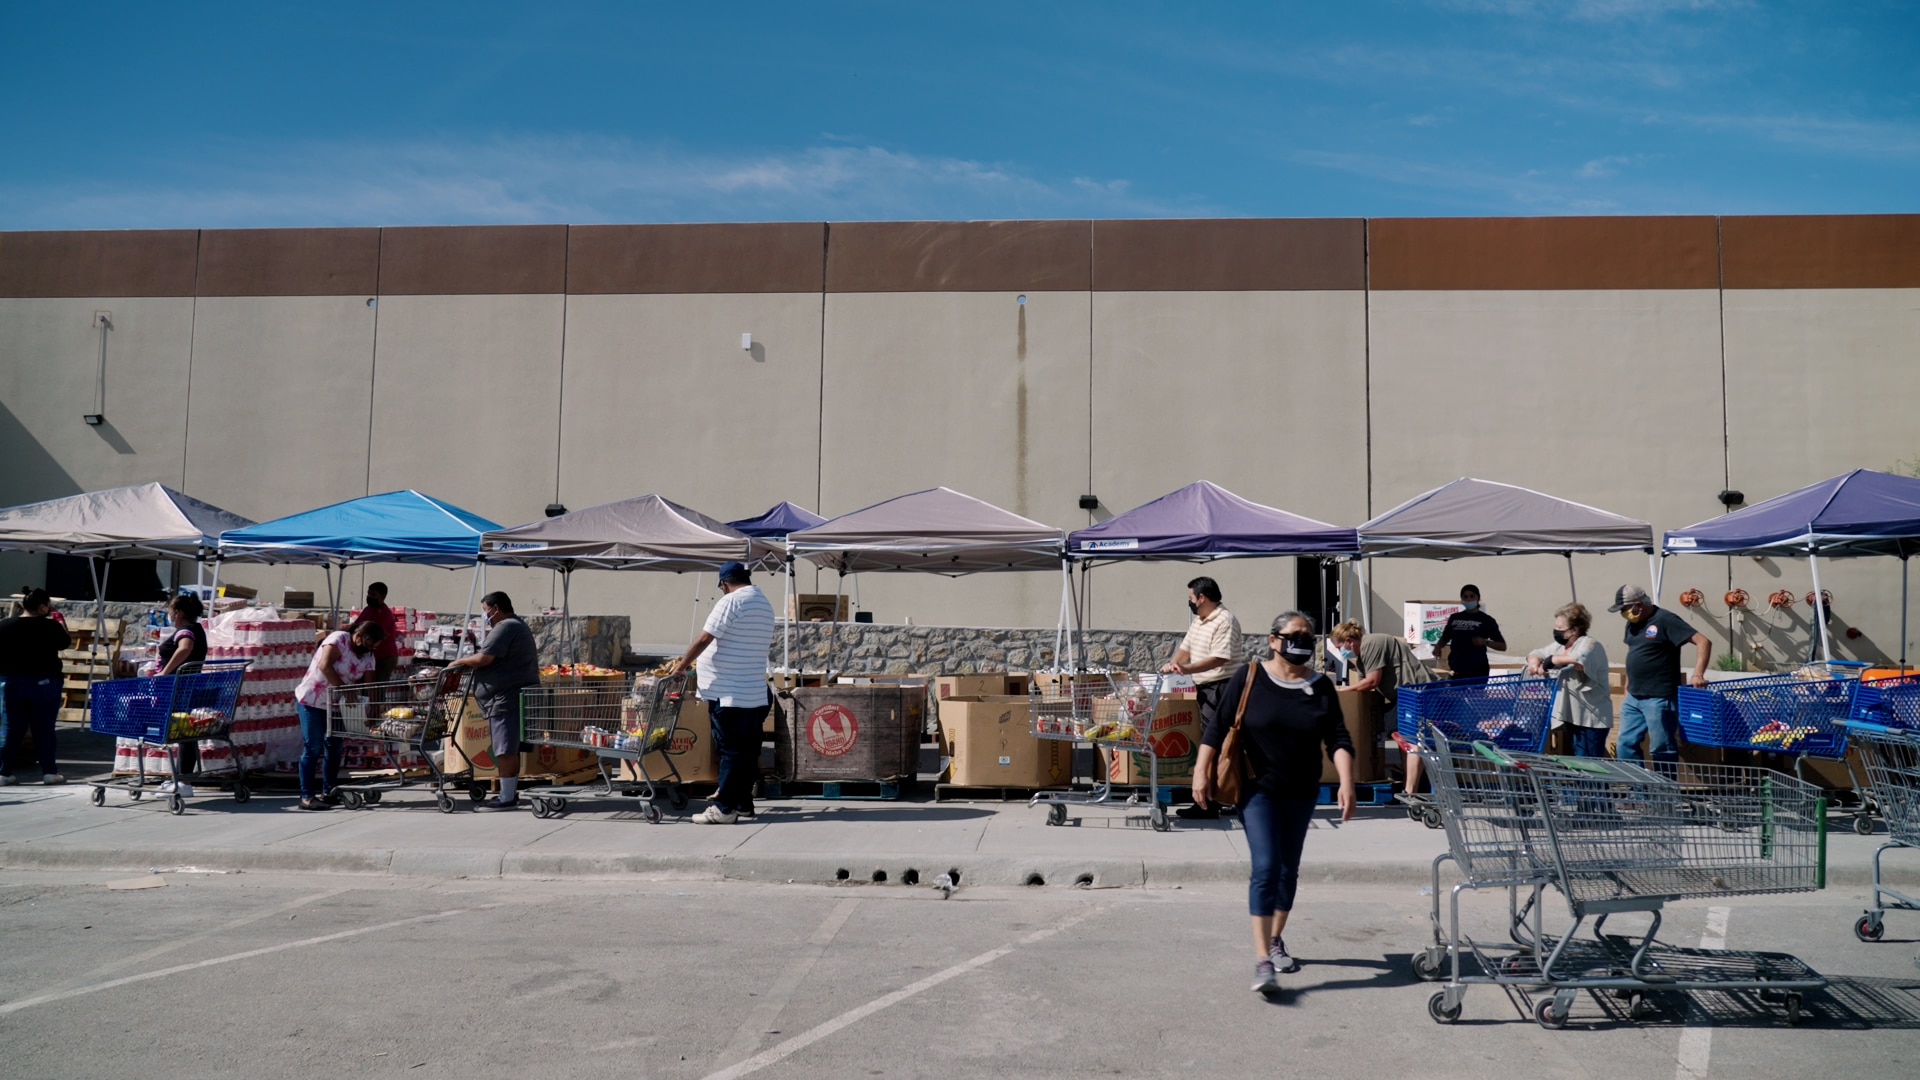 A group of people with shopping carts are lined up in front of a series of tents containing food items.